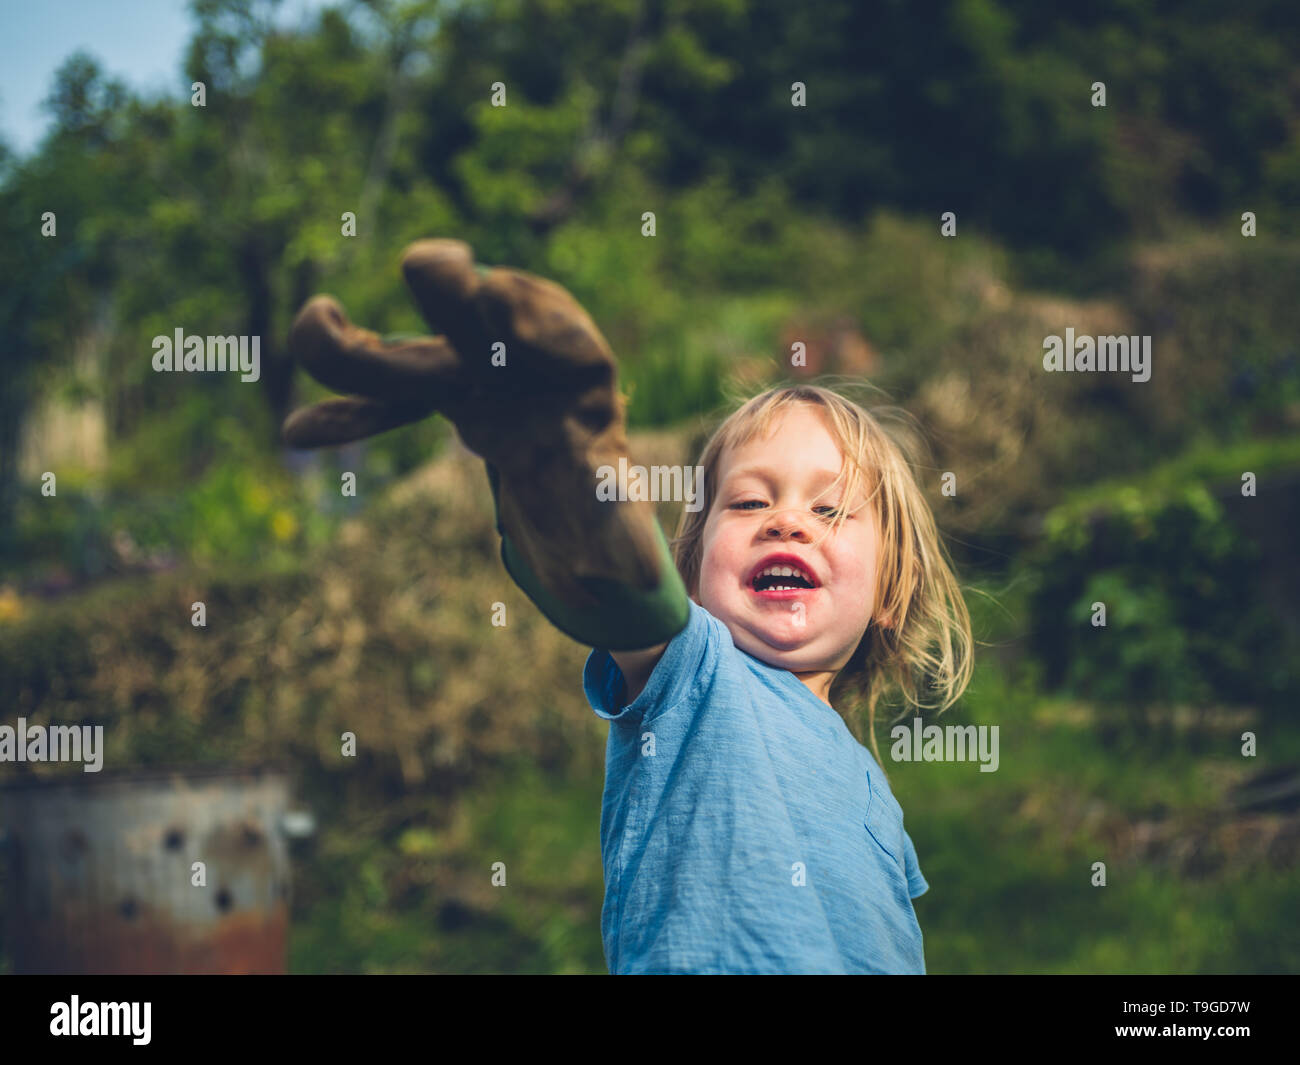 A little toddler is posing with a garden glove Stock Photo